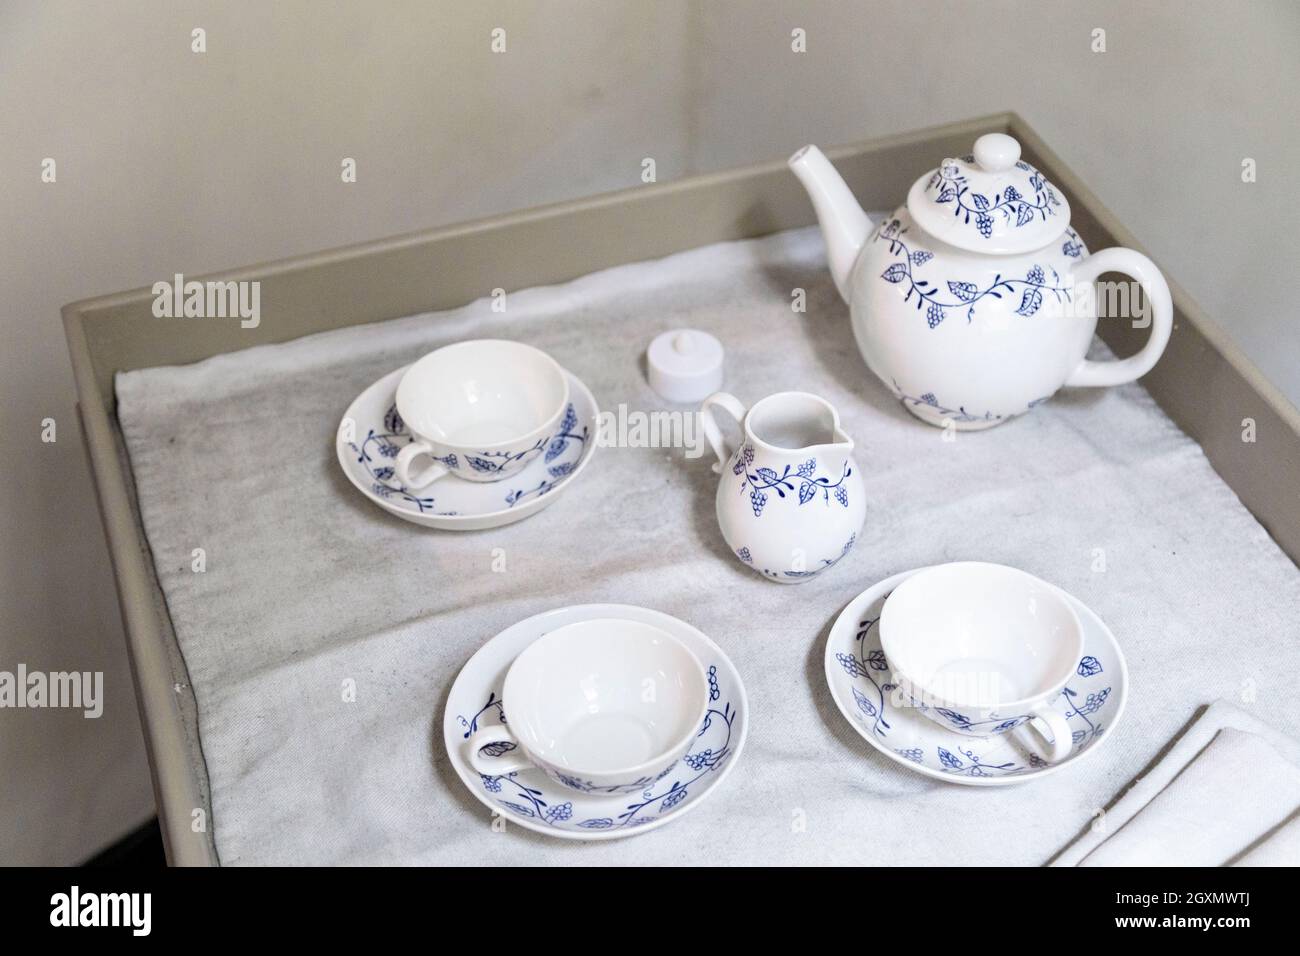 A tray with tea cups and tea pot inside Benjamin Franklin House in Charing Cross, London, UK Stock Photo